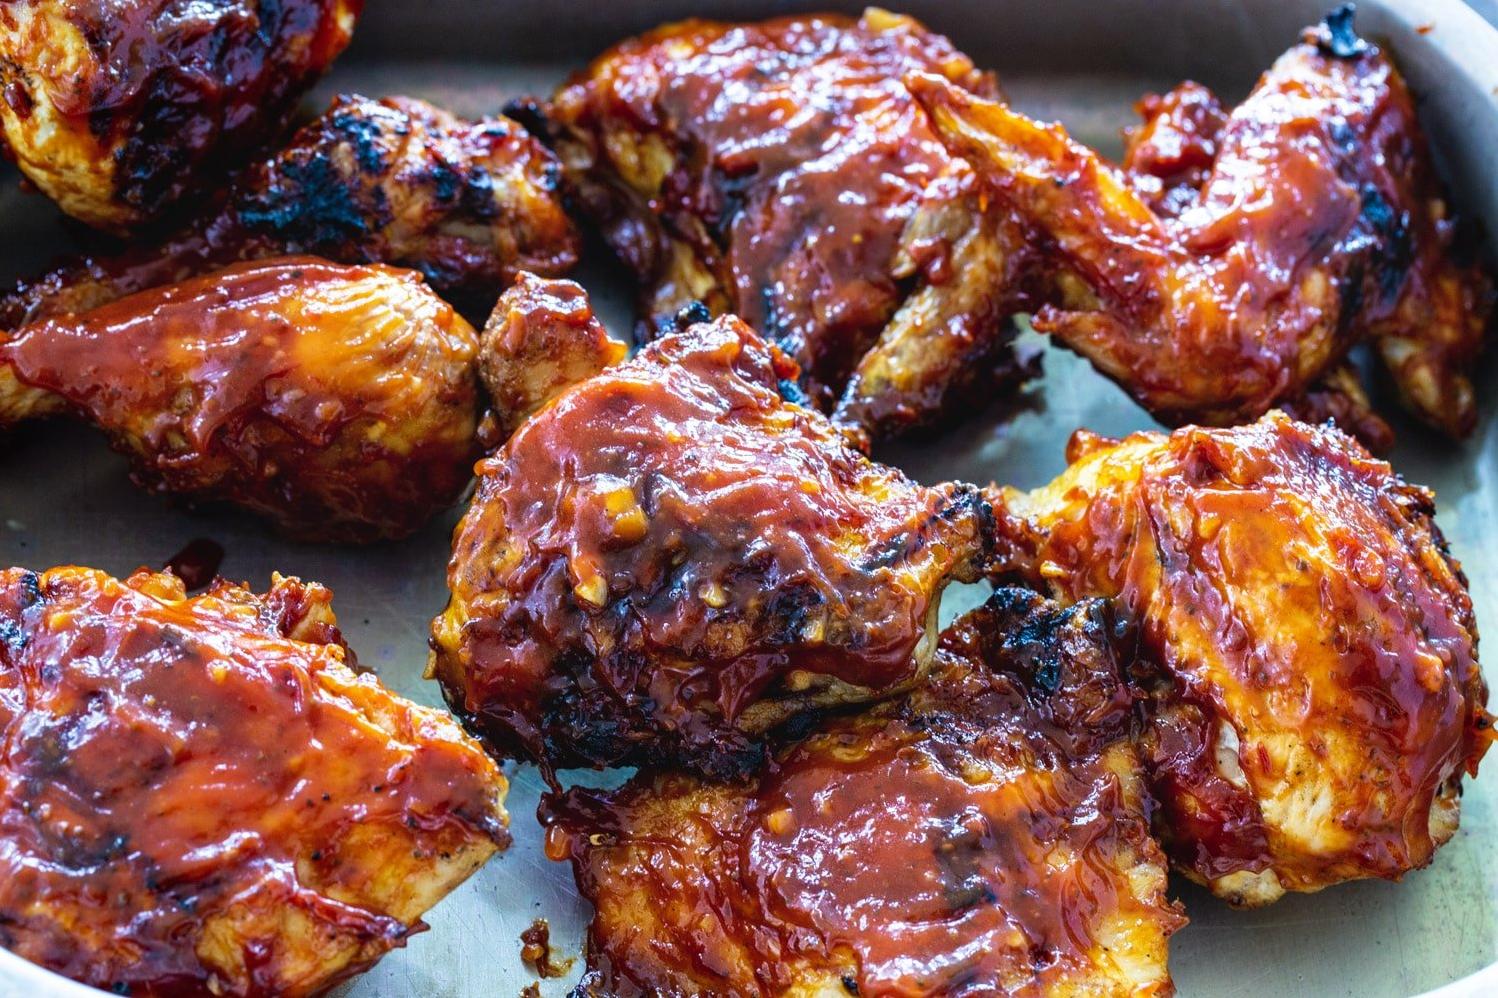  This chicken is the perfect combination of spicy and sweet.